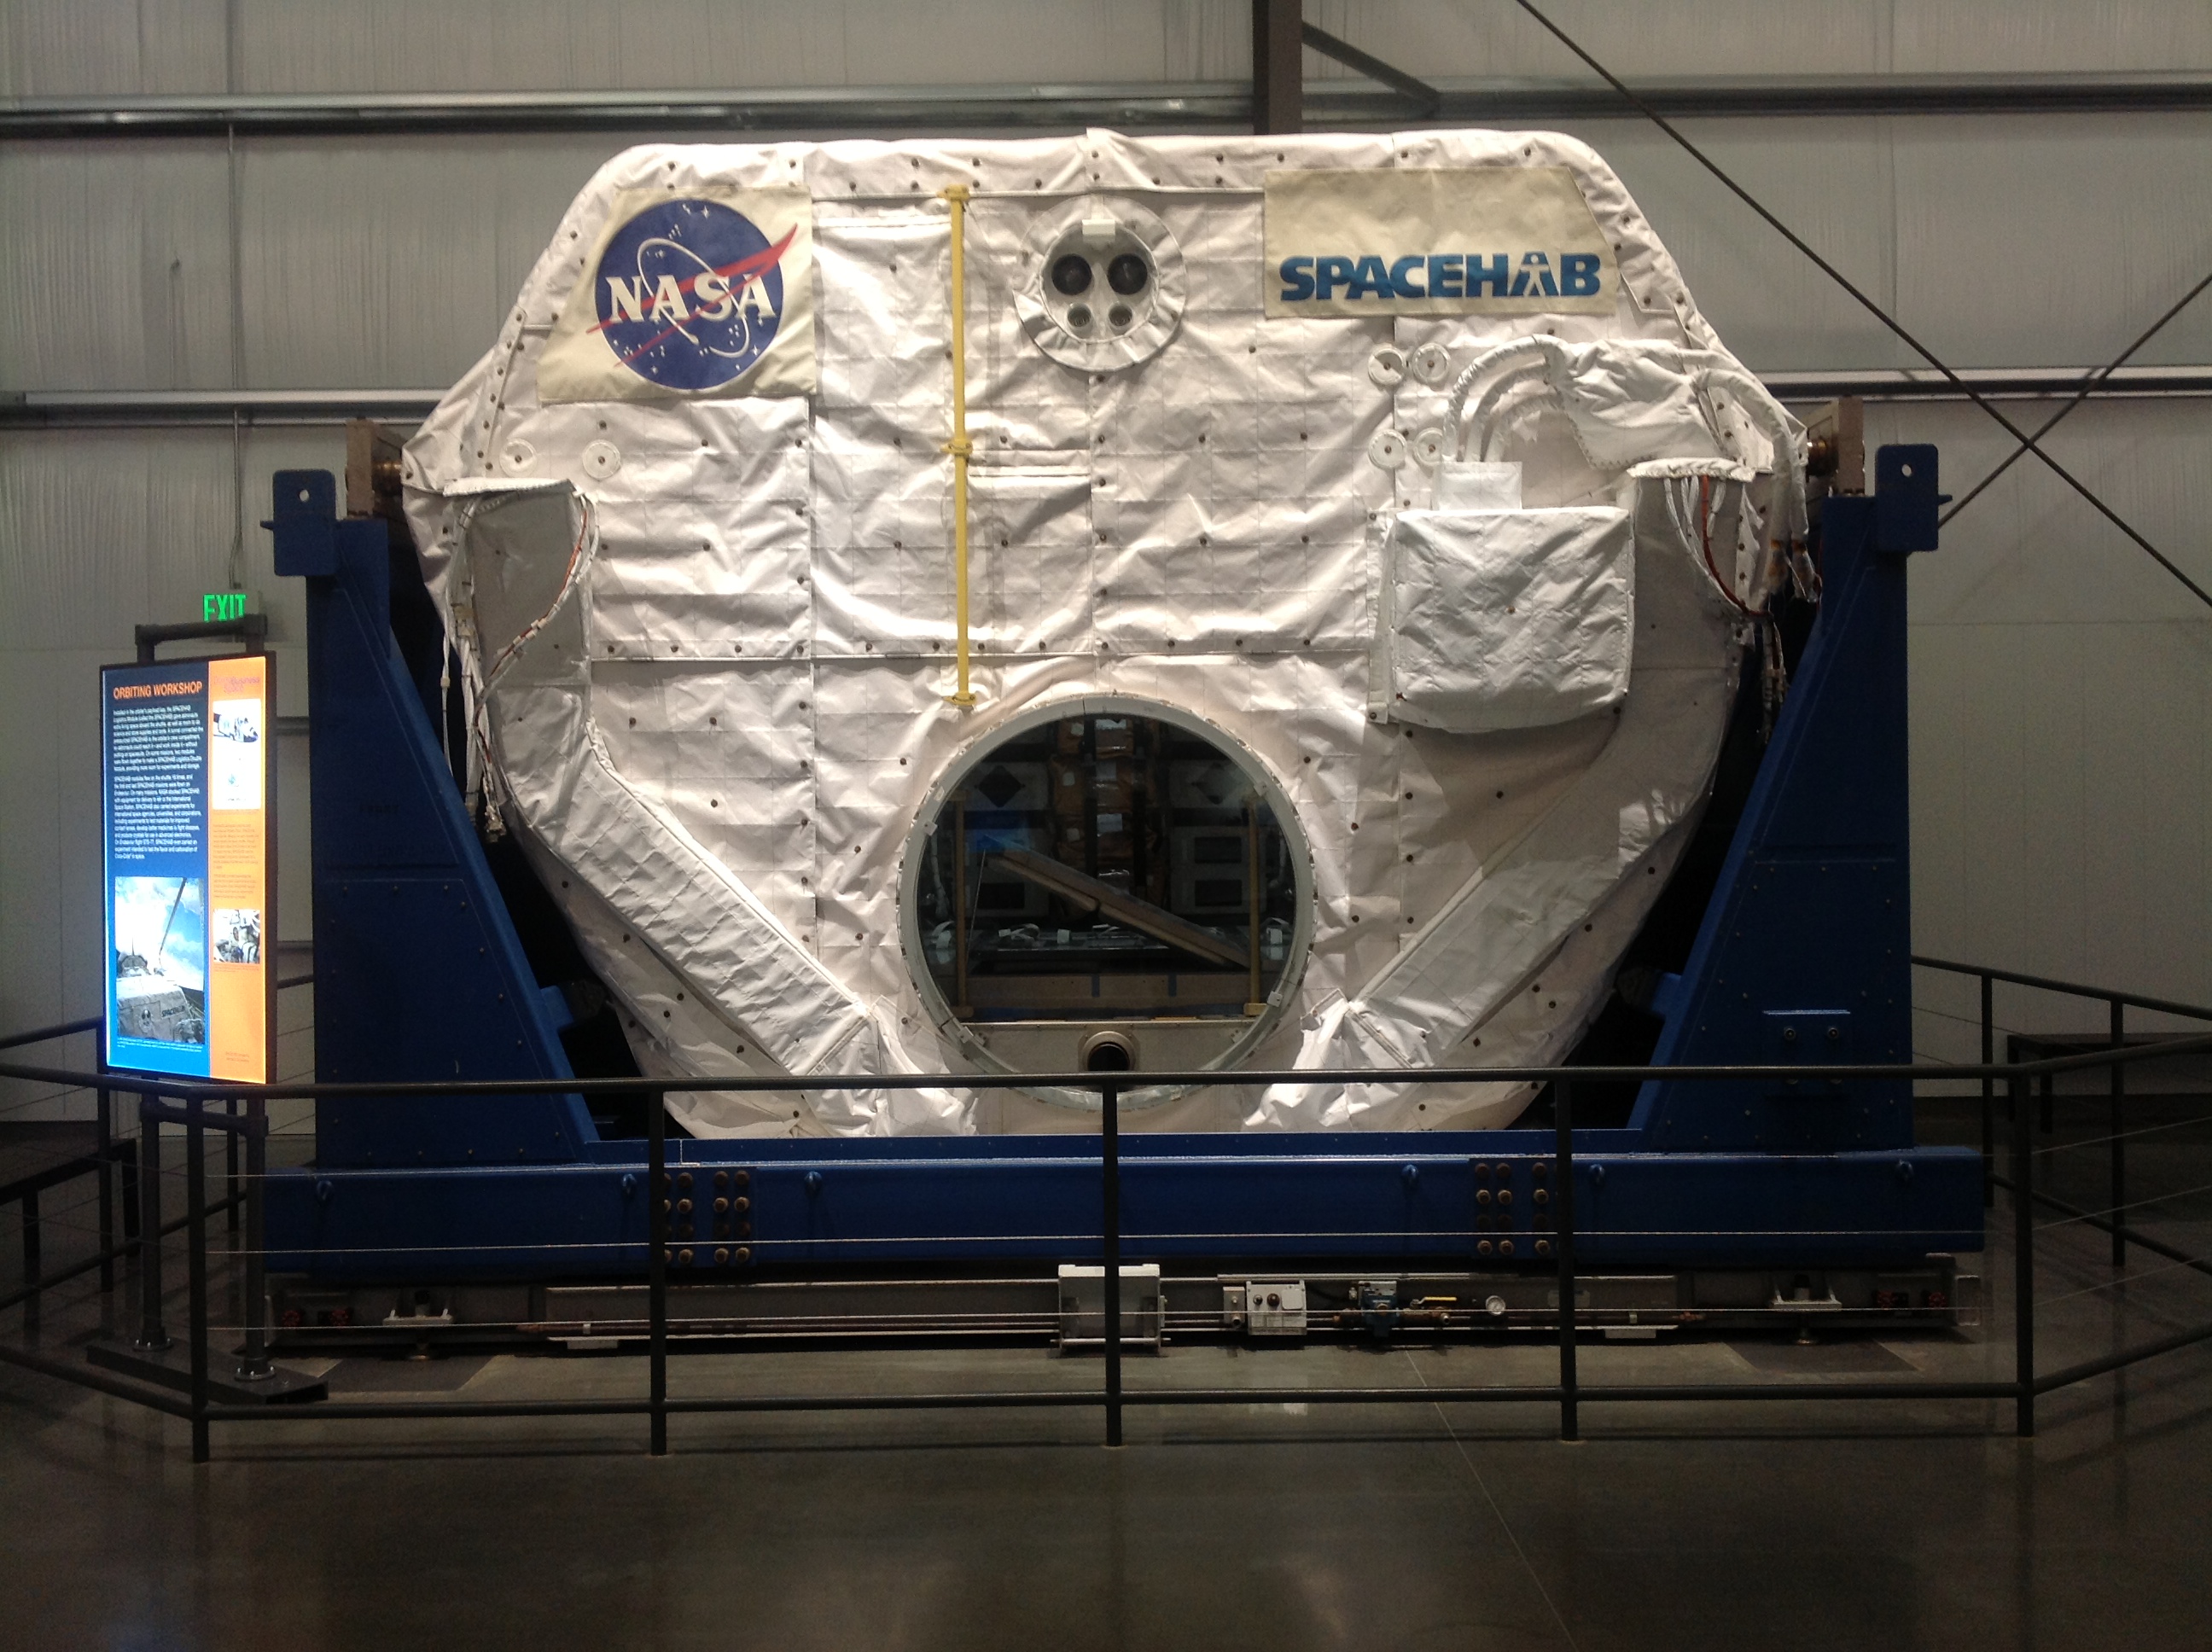 The Spacehab.